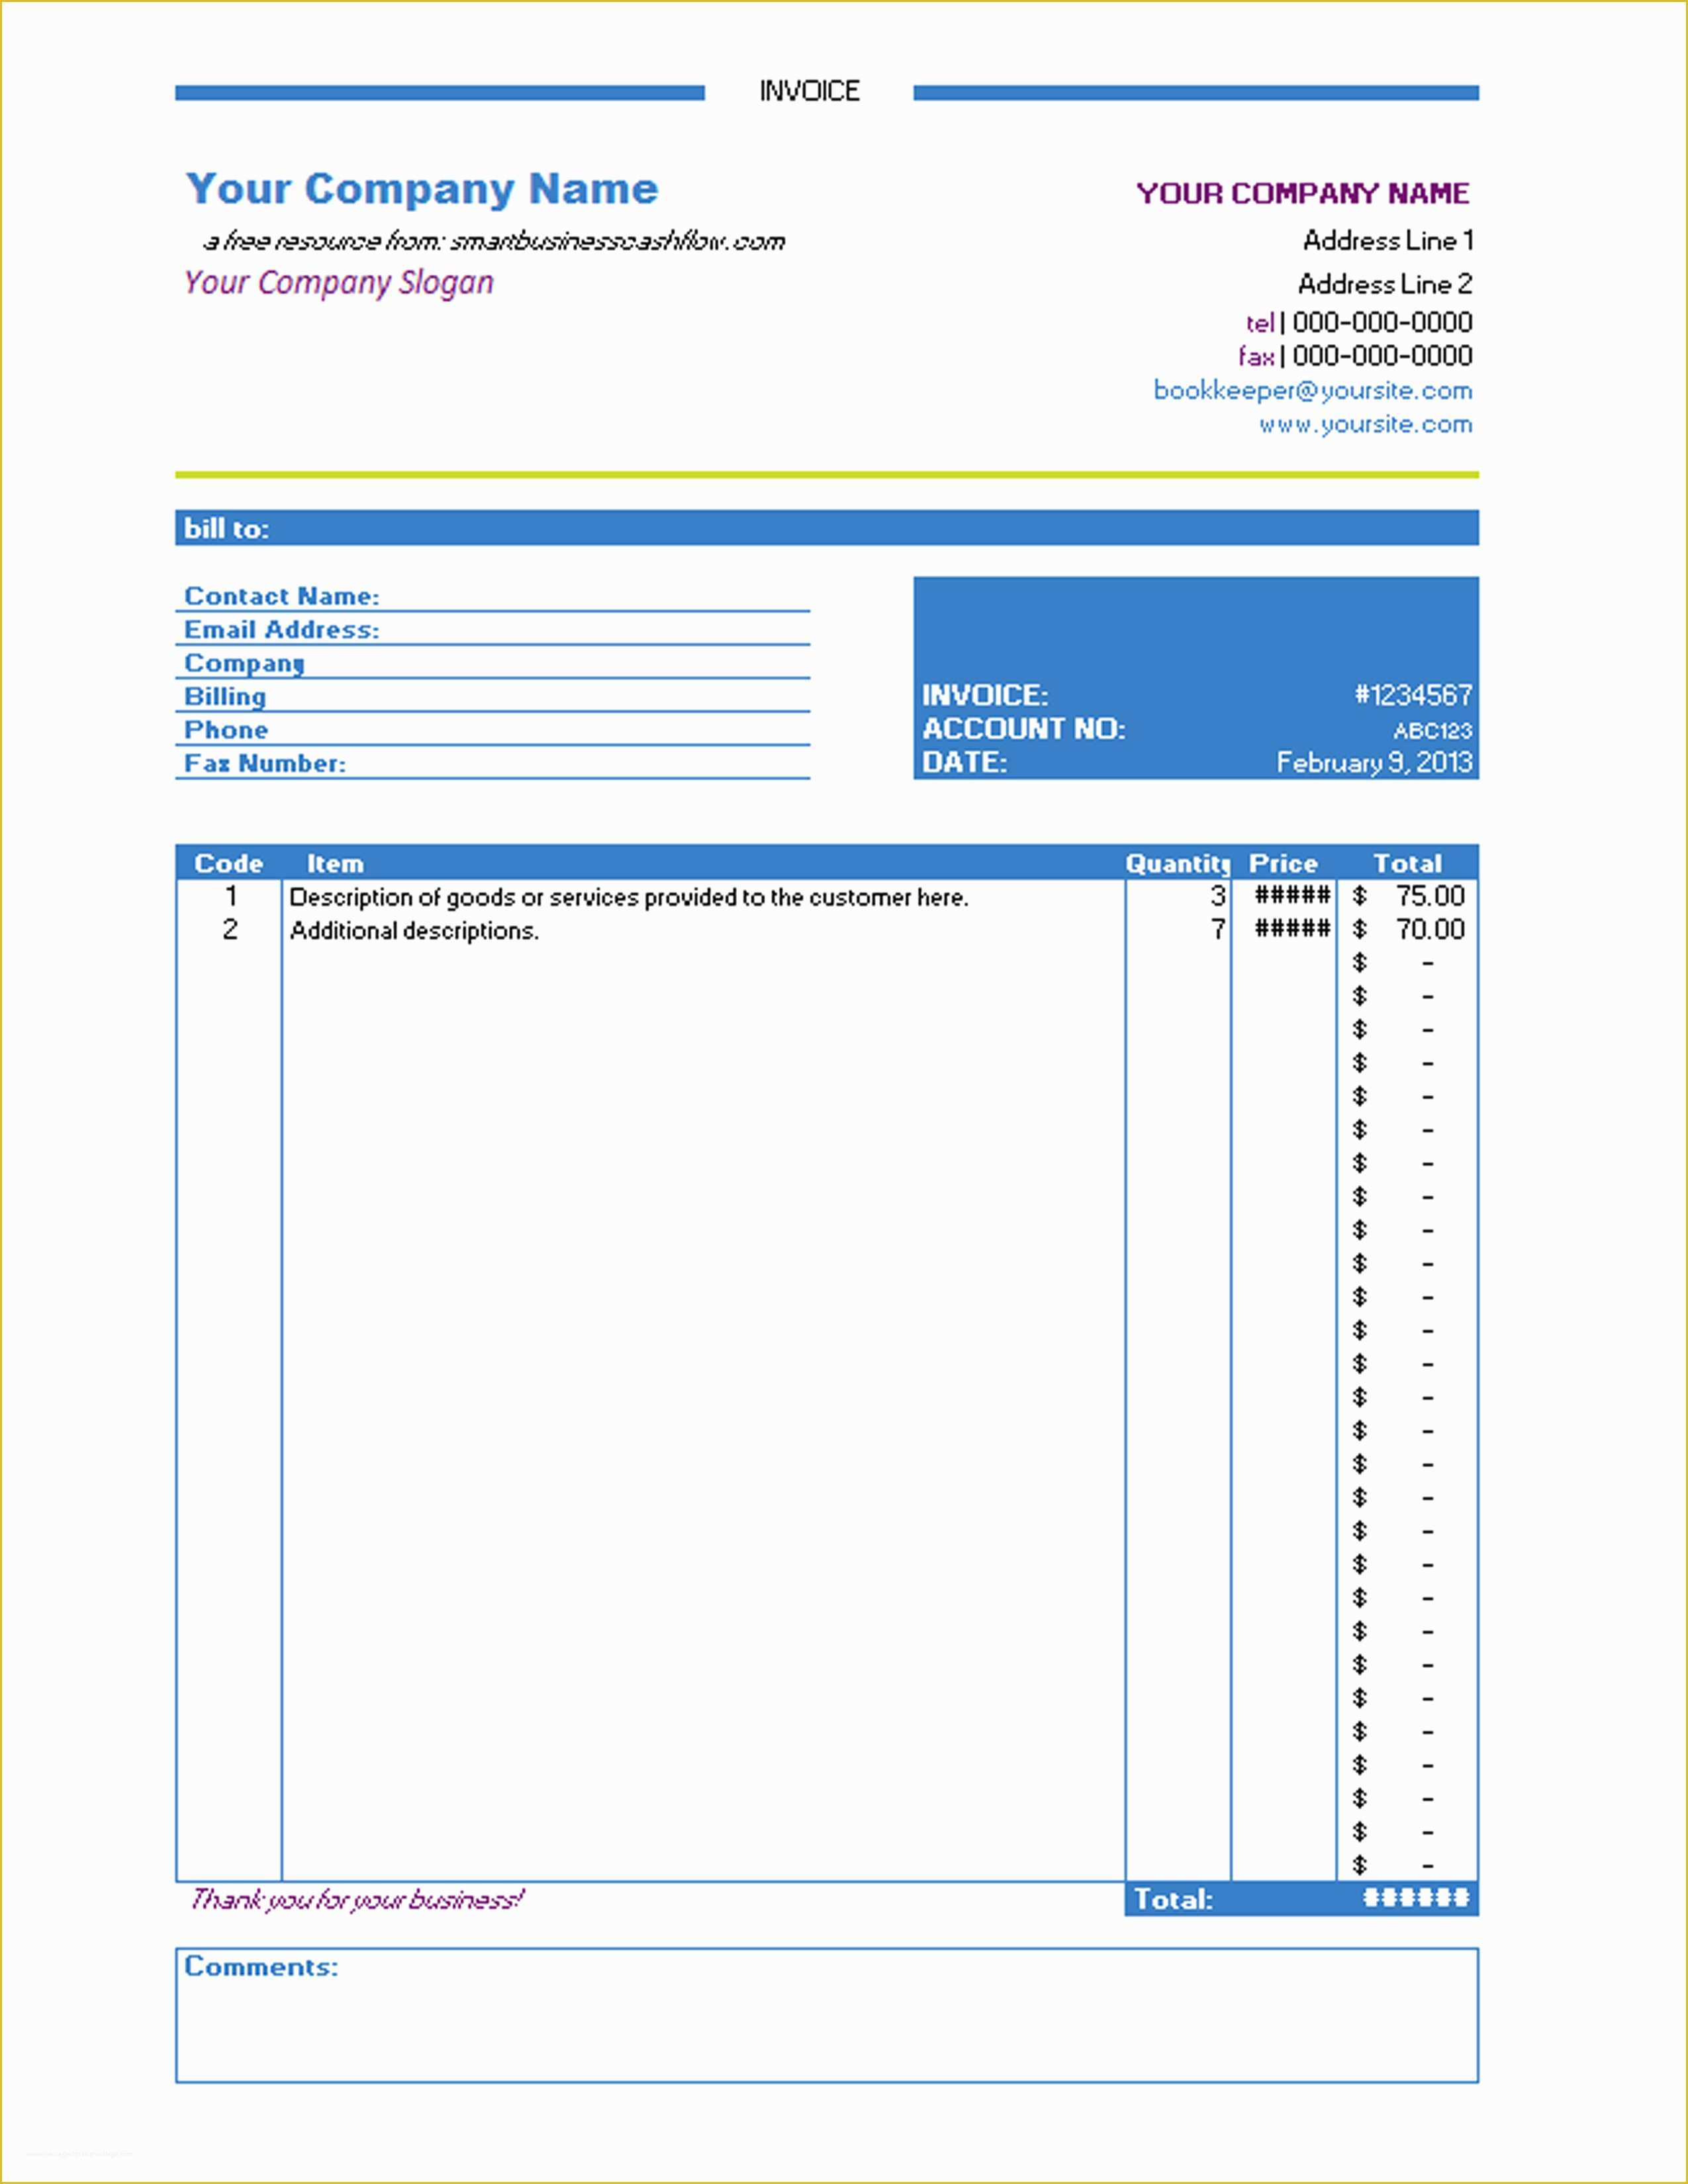 Free Printable Invoice Templates Excel Of Subcontractor Invoice Template Excel